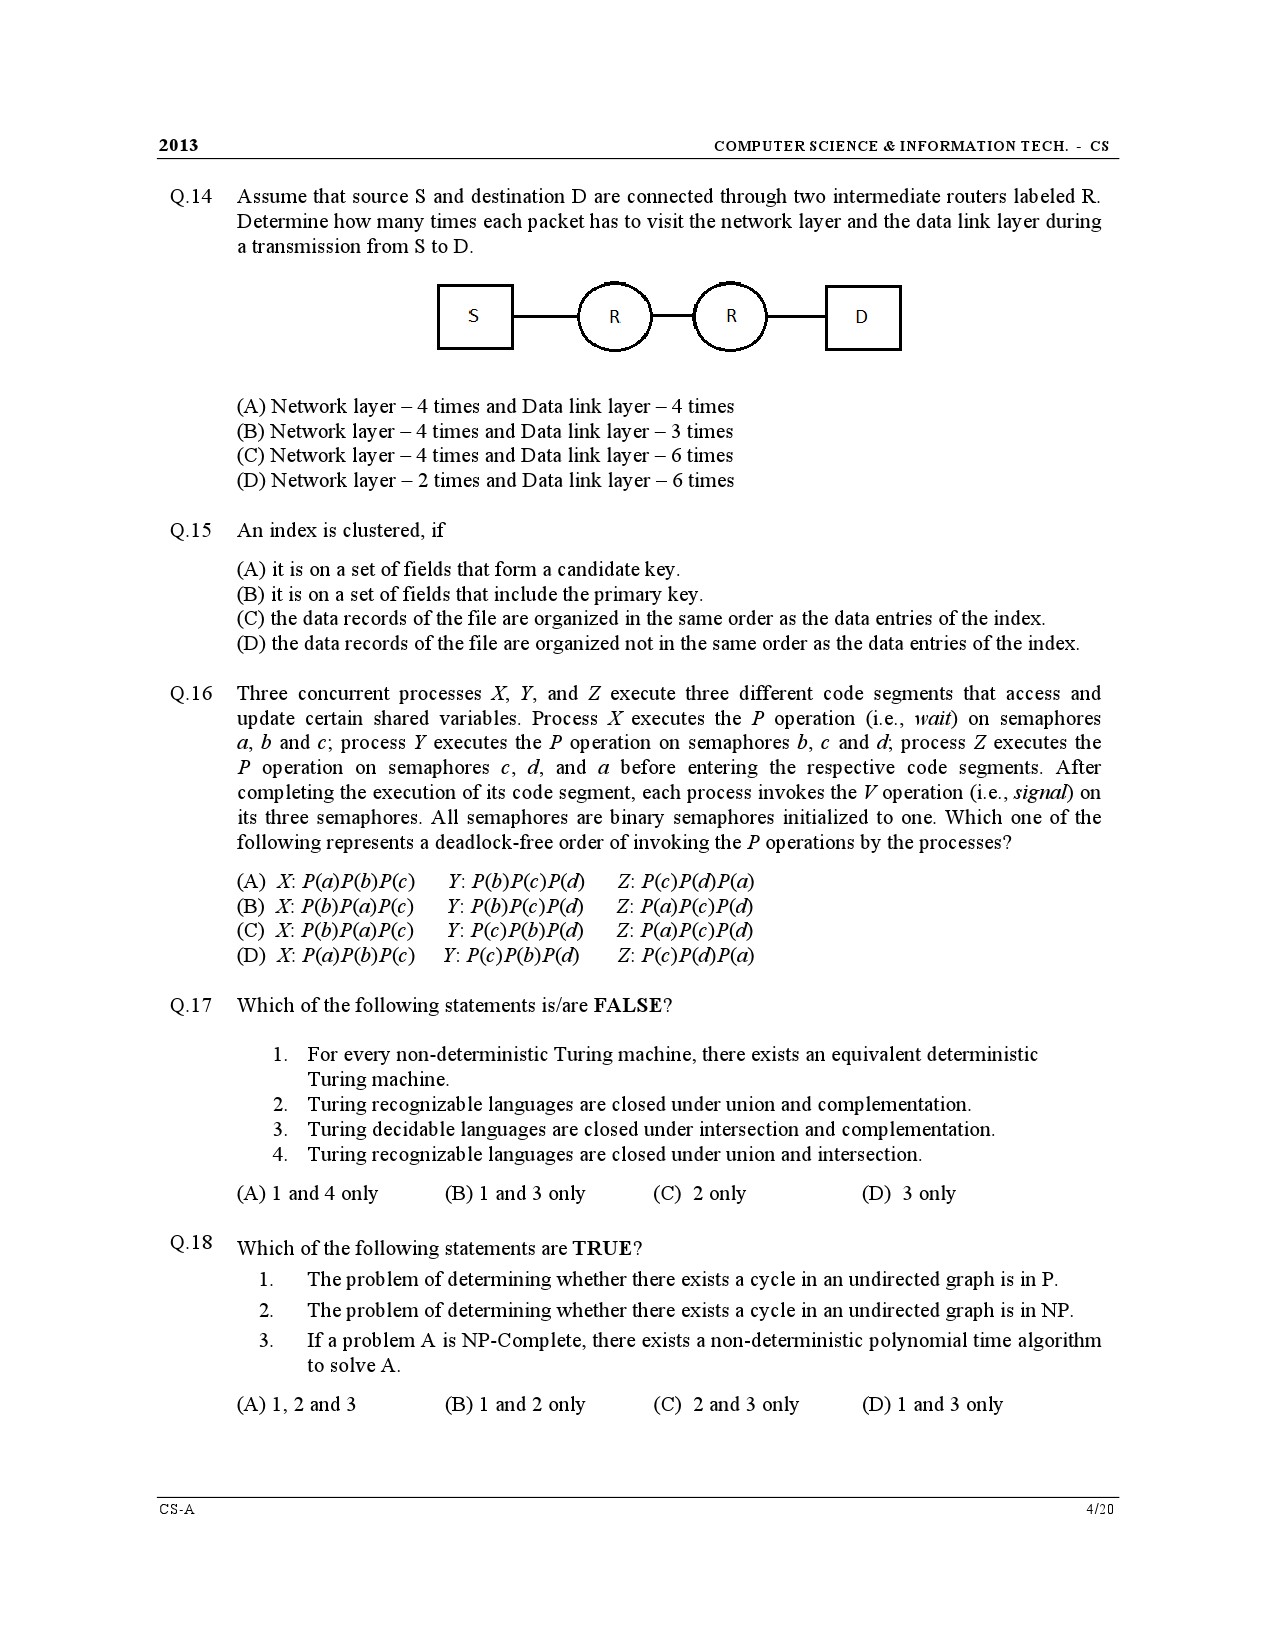 GATE Exam Question Paper 2013 Computer Science and Information Technology 4